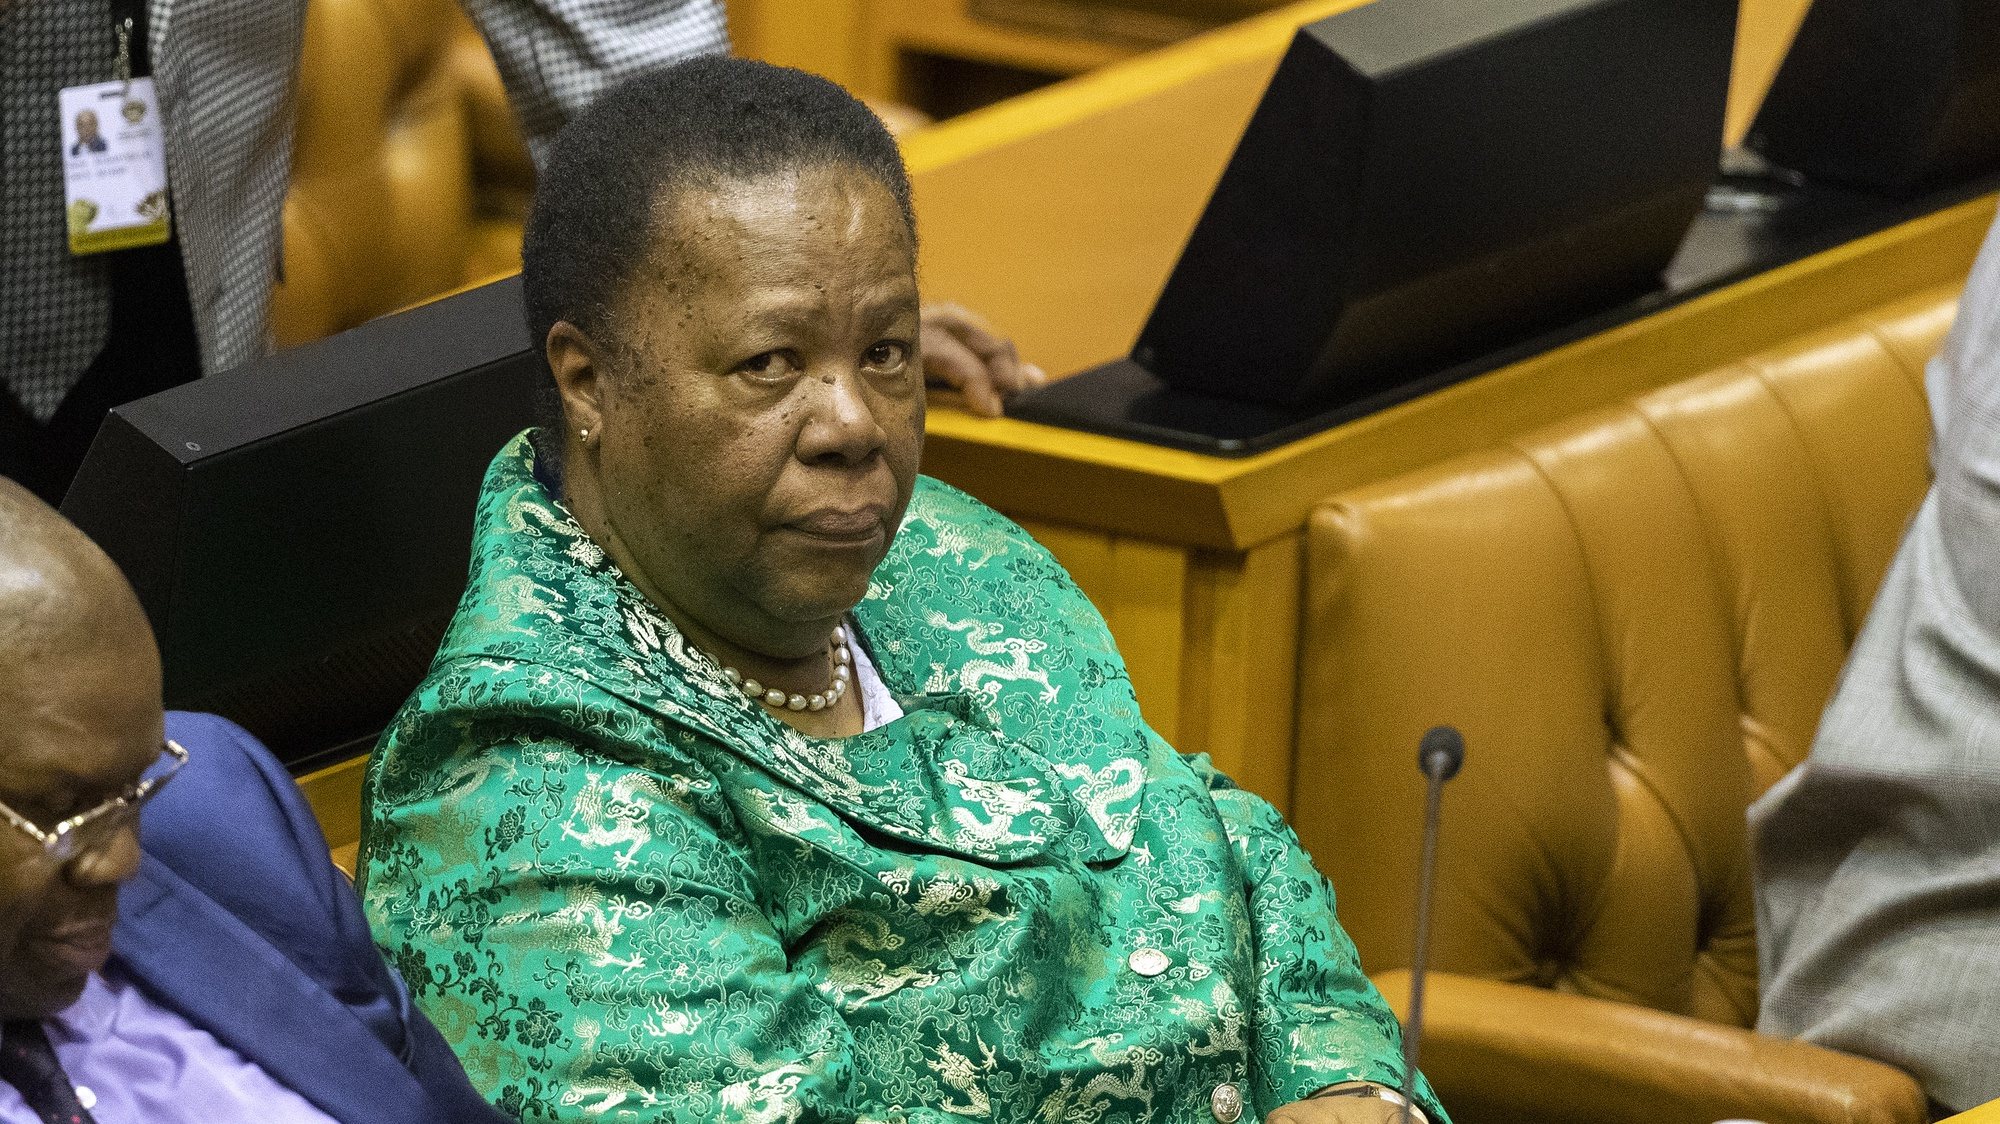 epa07592936 Member of parliament Naledi Pandor looks on during the swearing in of new members of the National Assembly and election of the National Assembly speaker and election of the president in Parliament, Cape Town, South Africa 22 May 2019. This is the first sitting of parliament following the 2019 general elections making this the 6th parliament since the fall of apartheid.  EPA/NIC BOTHMA